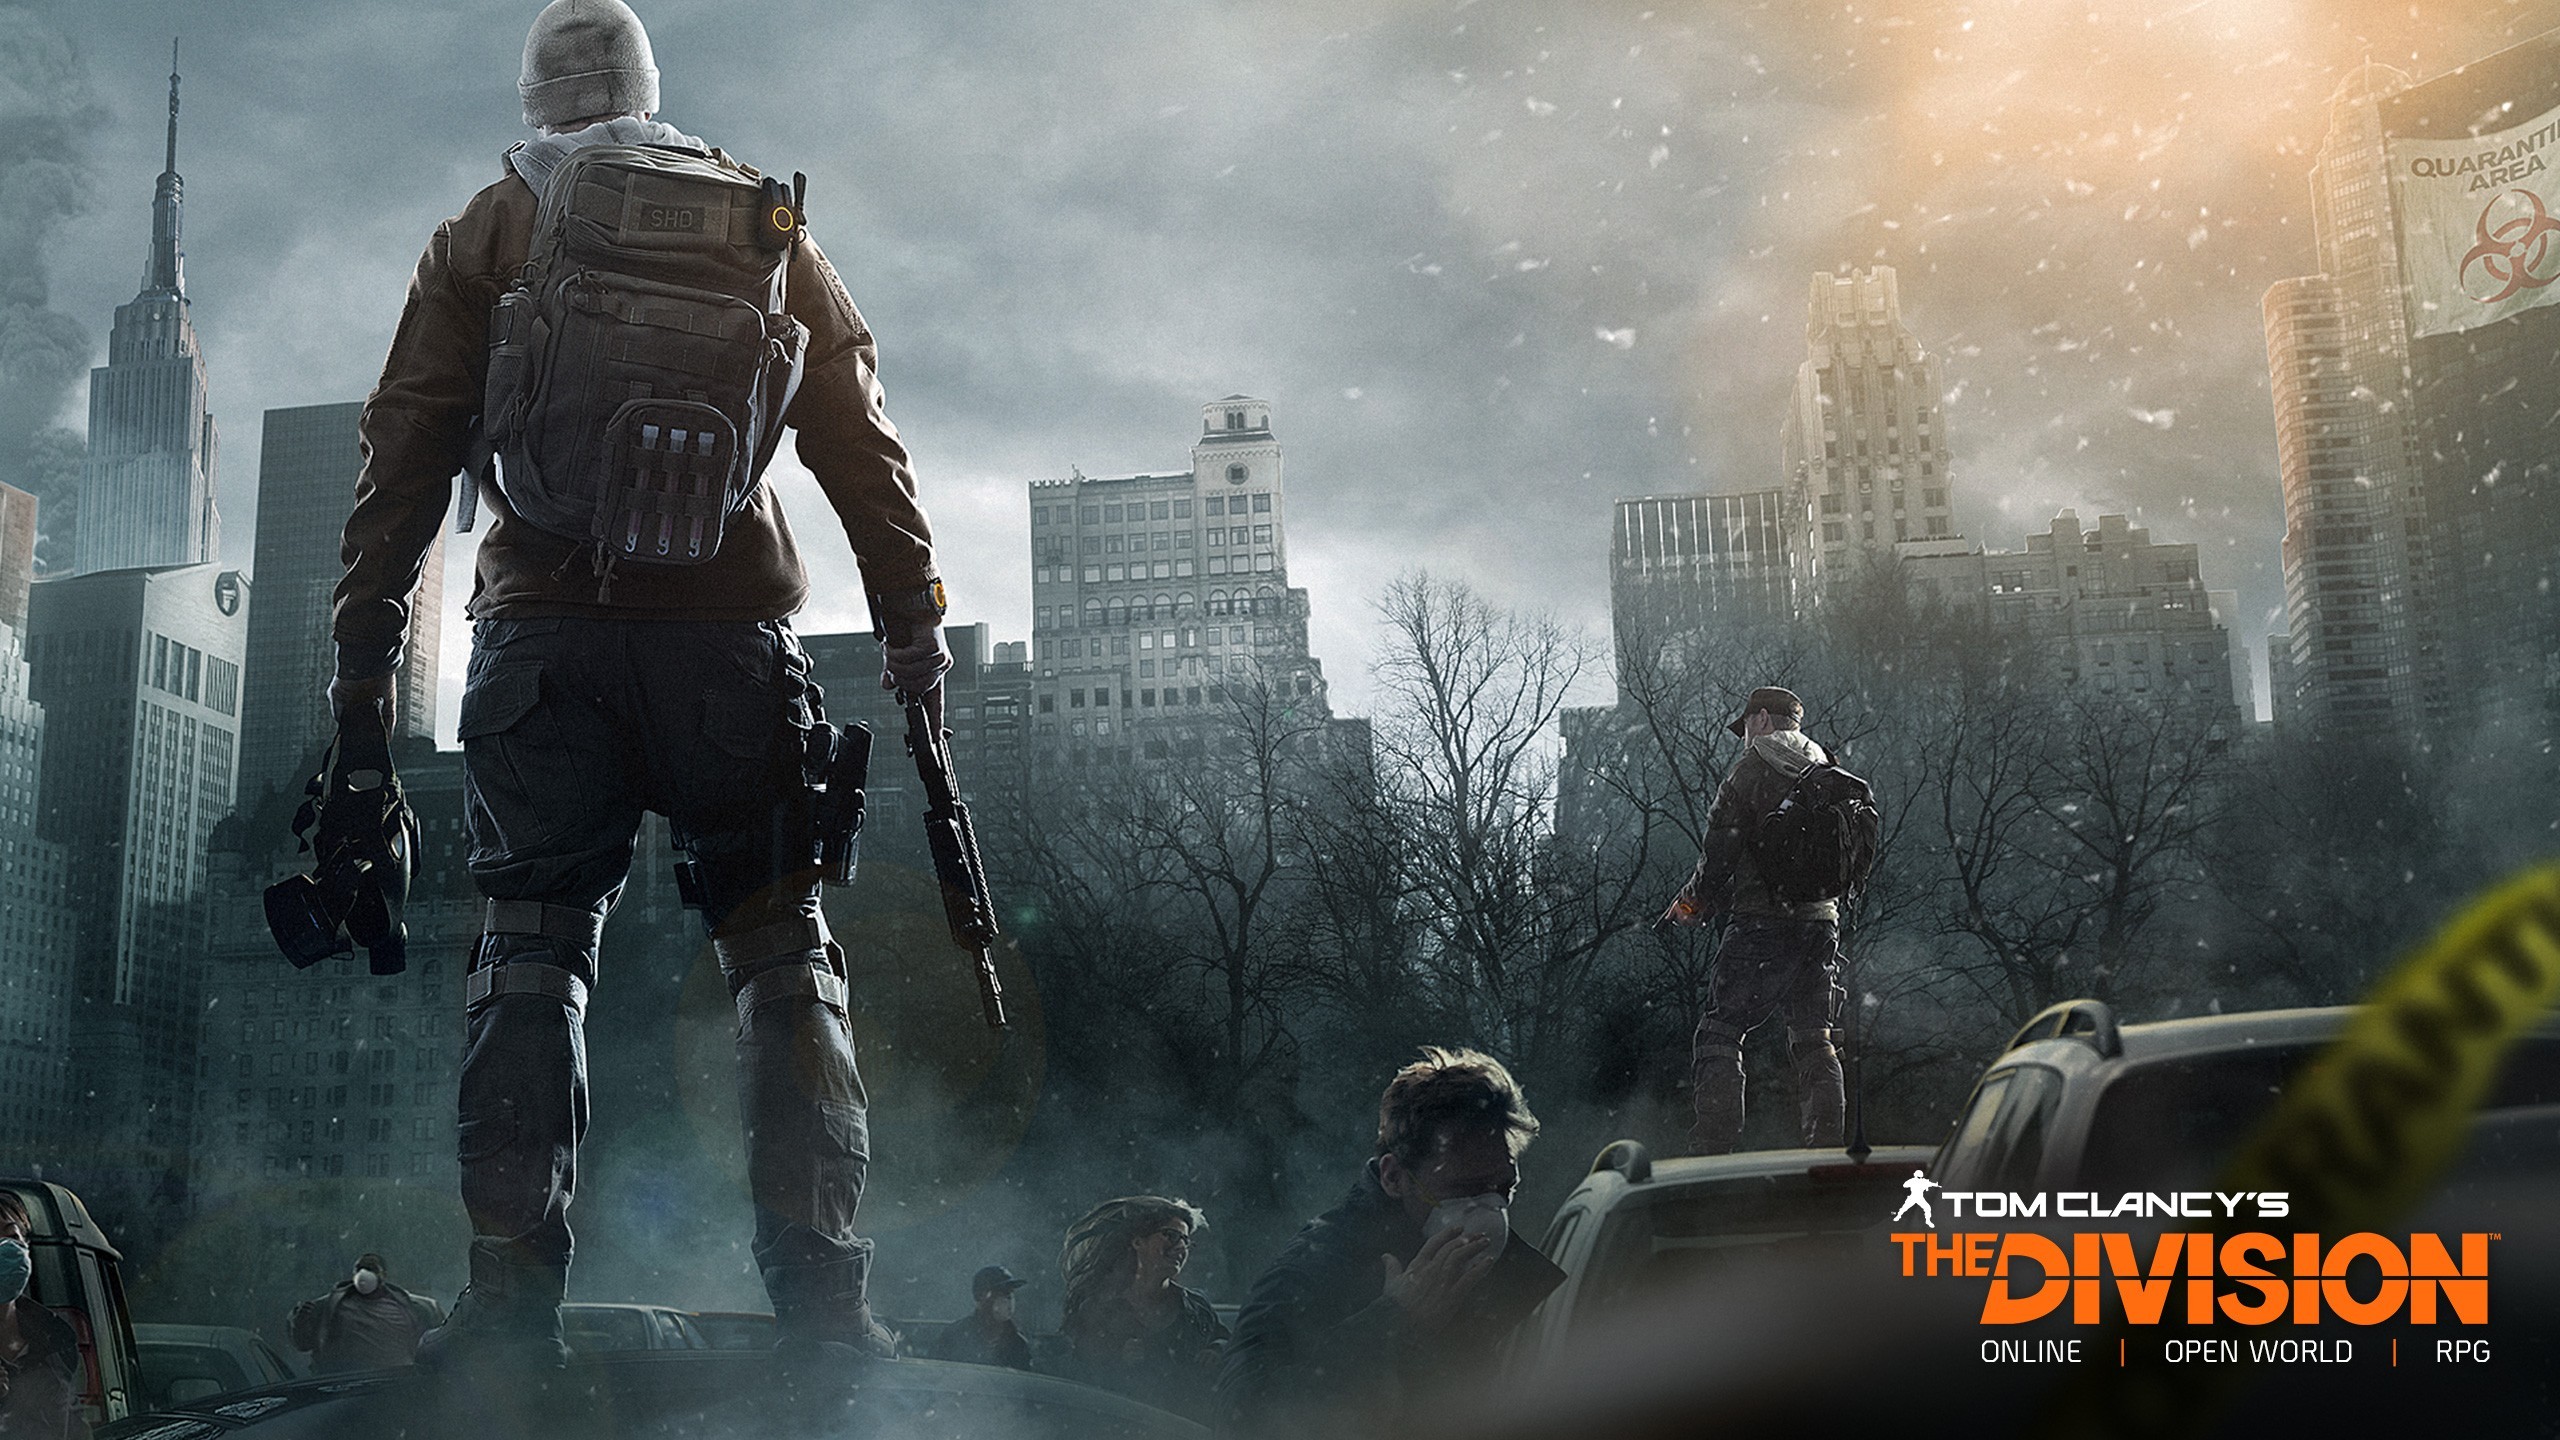 General 2560x1440 Tom Clancy's The Division video games PC gaming video game art